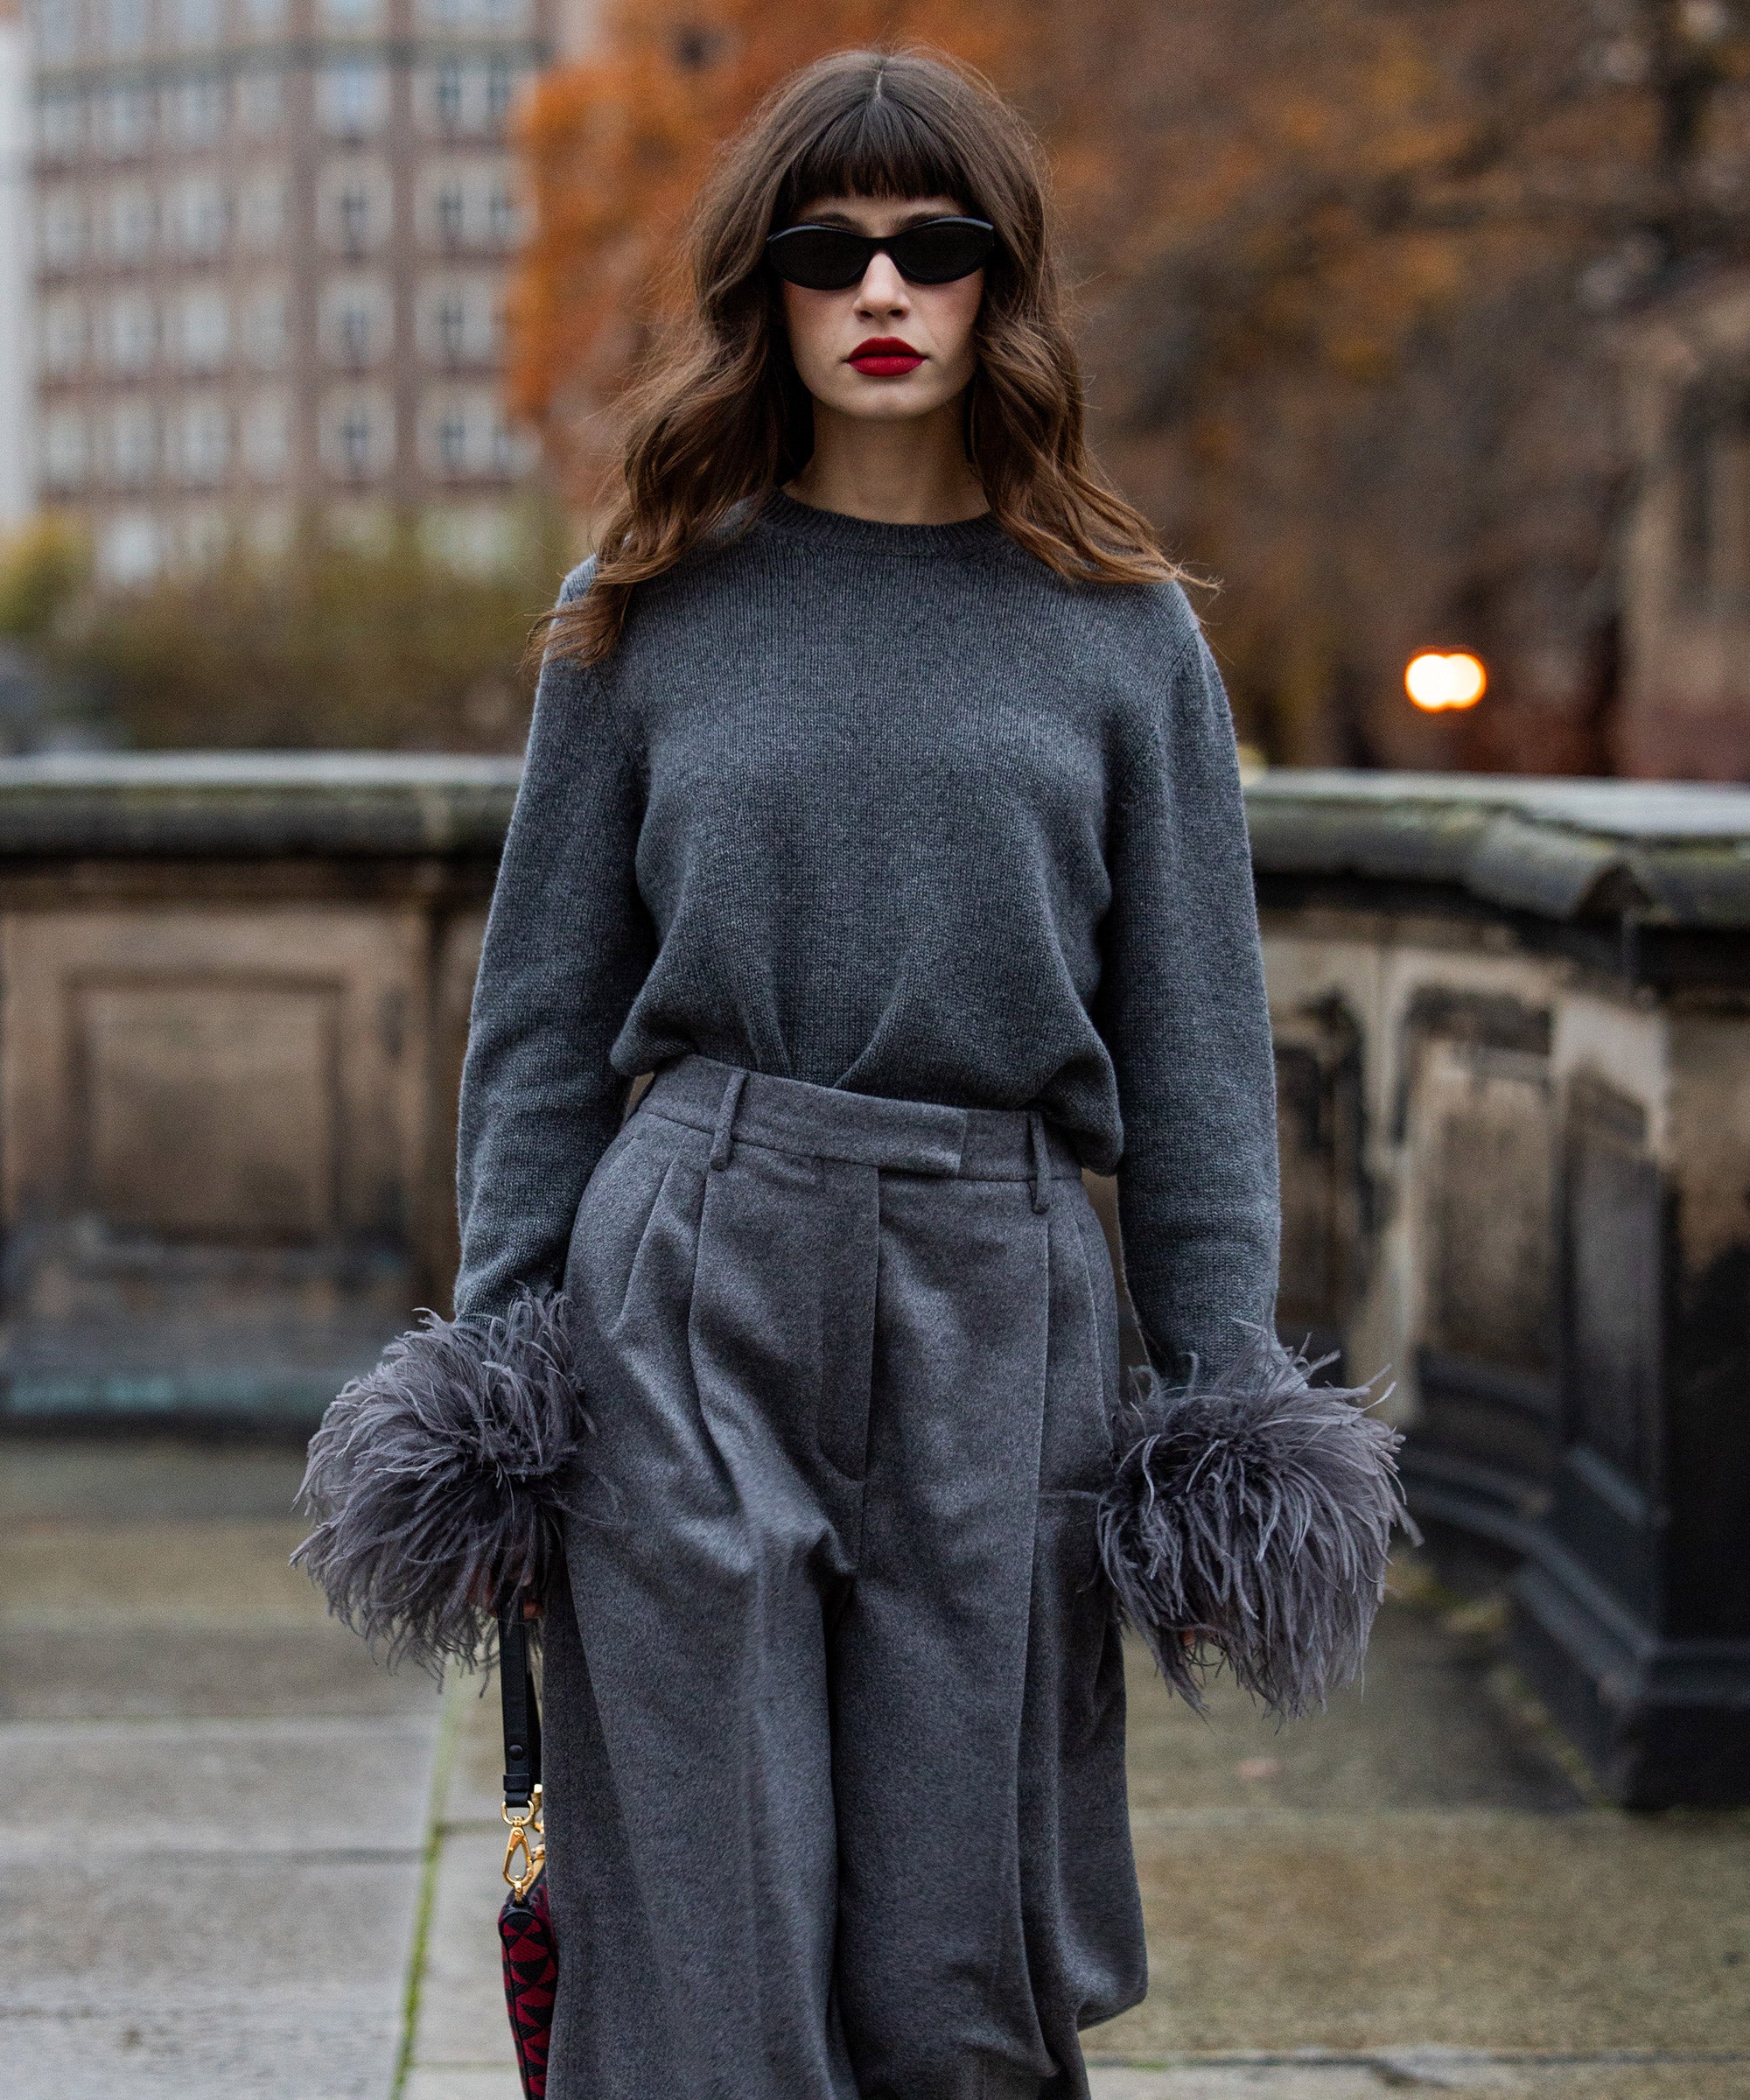 Grey Oversized Sweater with Black Wide Leg Pants Outfits (4 ideas &  outfits)